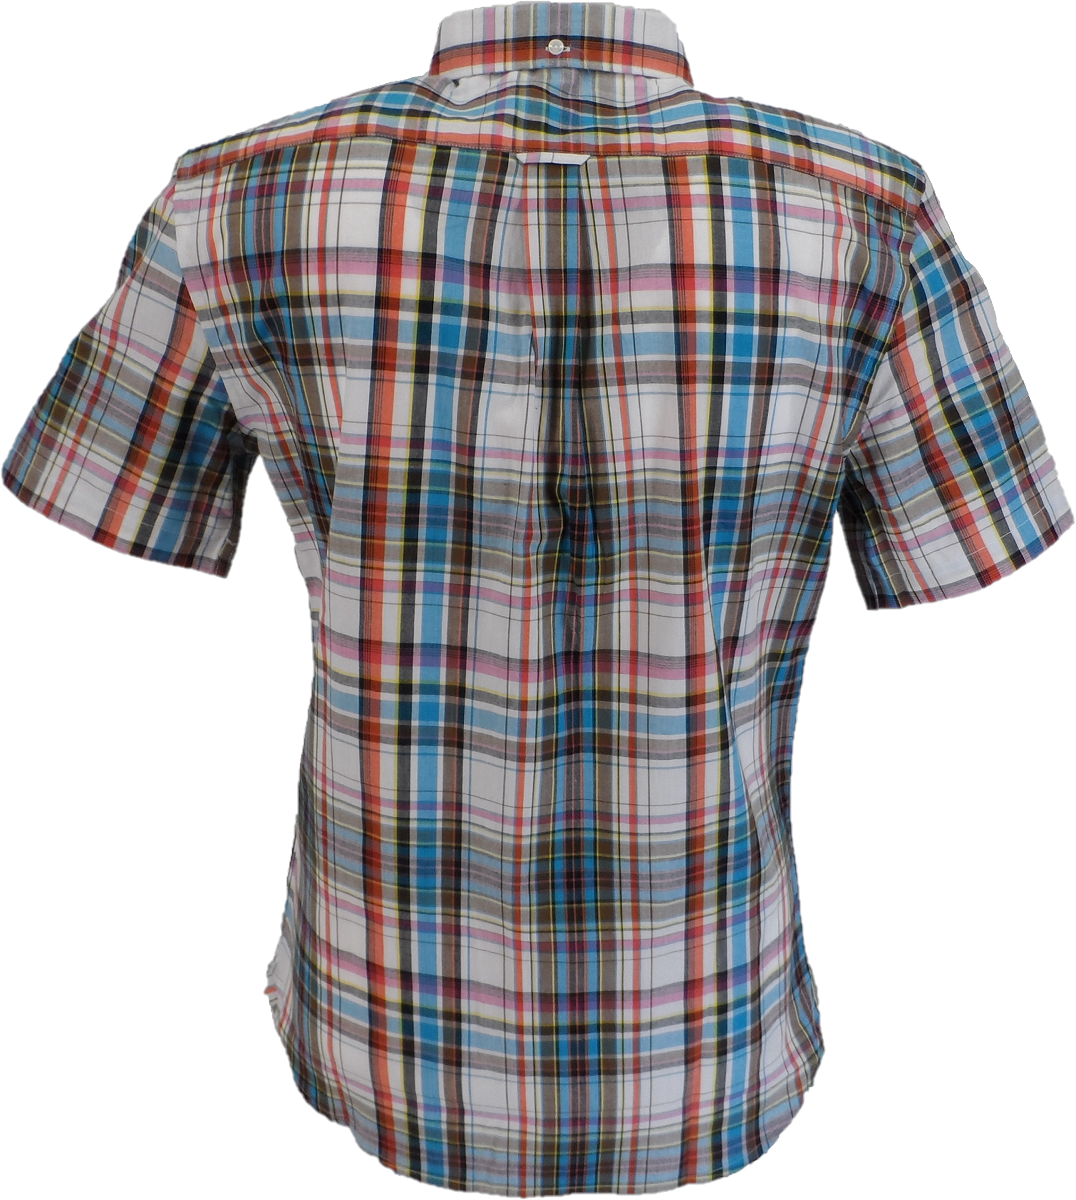 Lambretta Mens White/Blue/Red Checked Short Sleeved Button Down Shirts